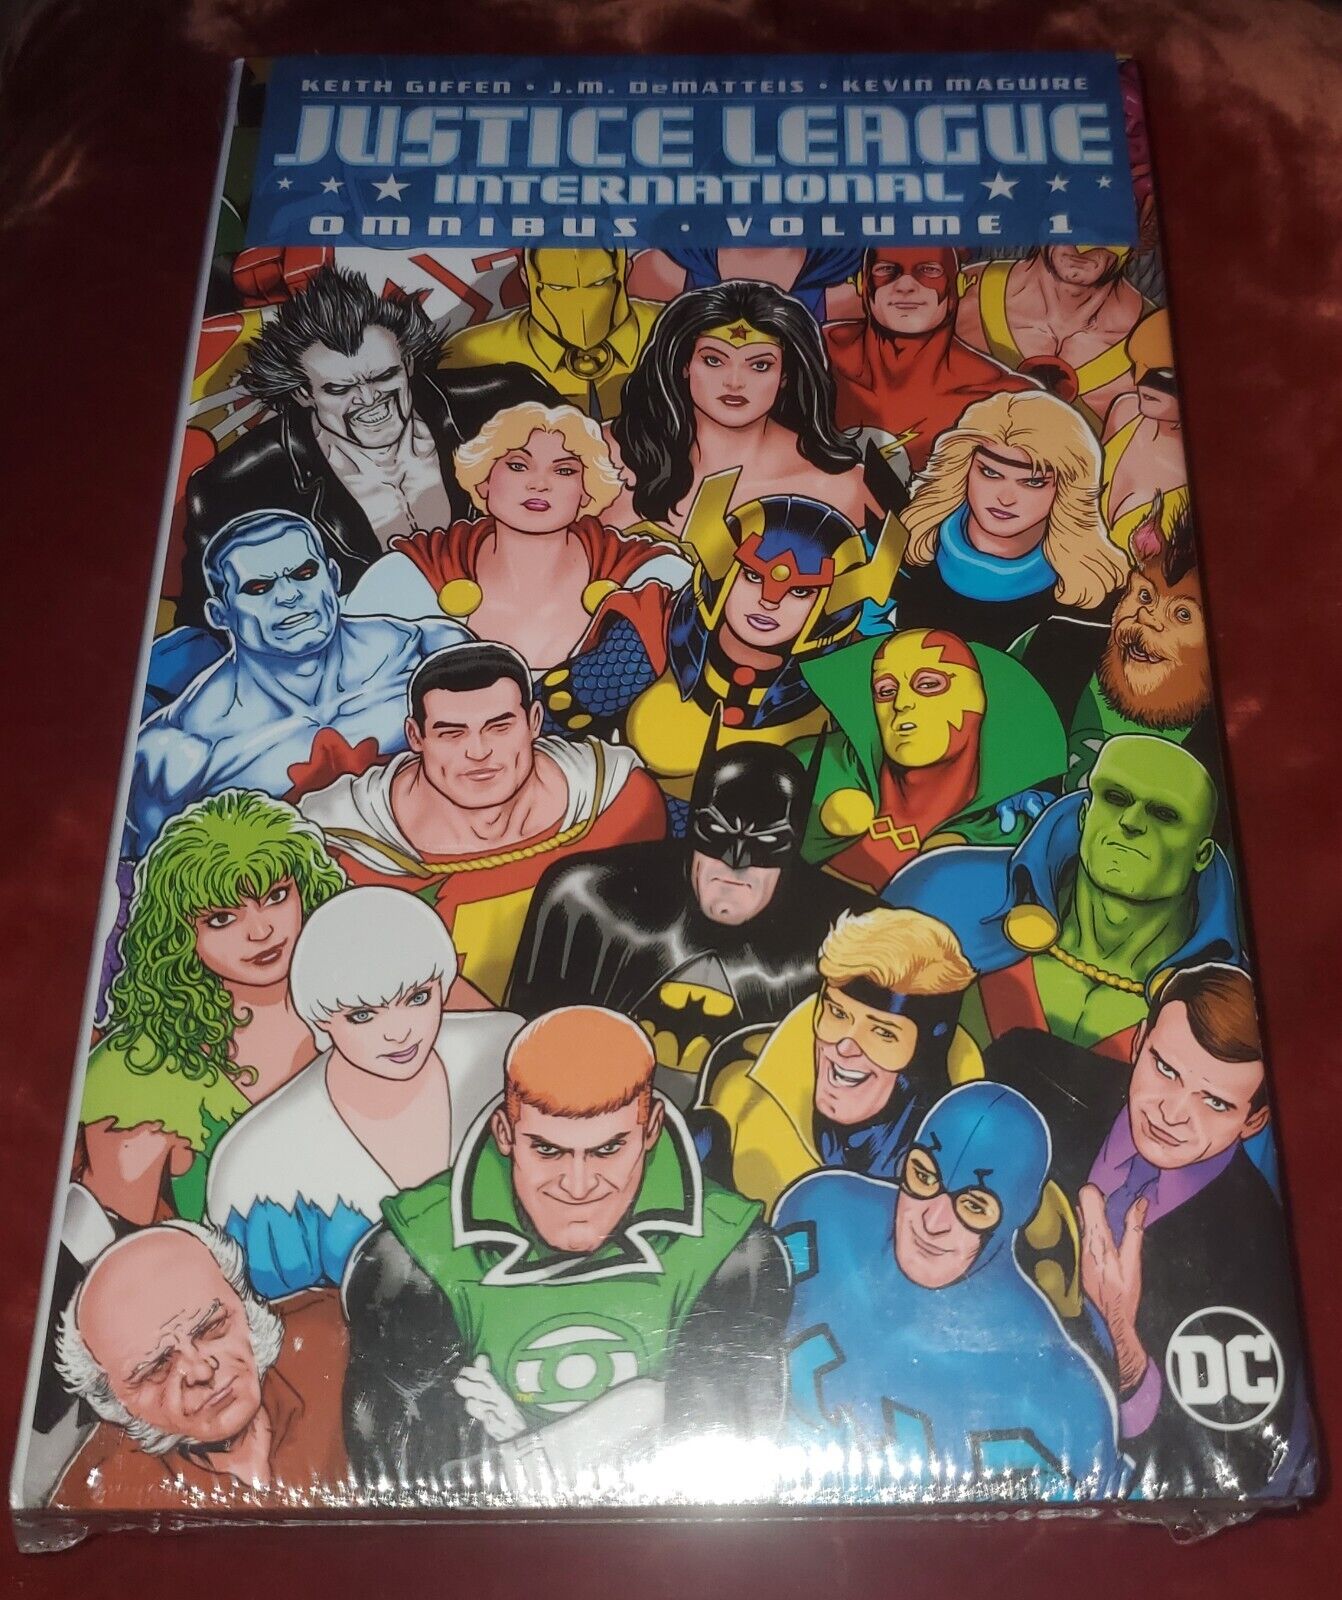 Justice League International Omnibus Vol. 1 by J. M. Dematteis and Keith Giffen